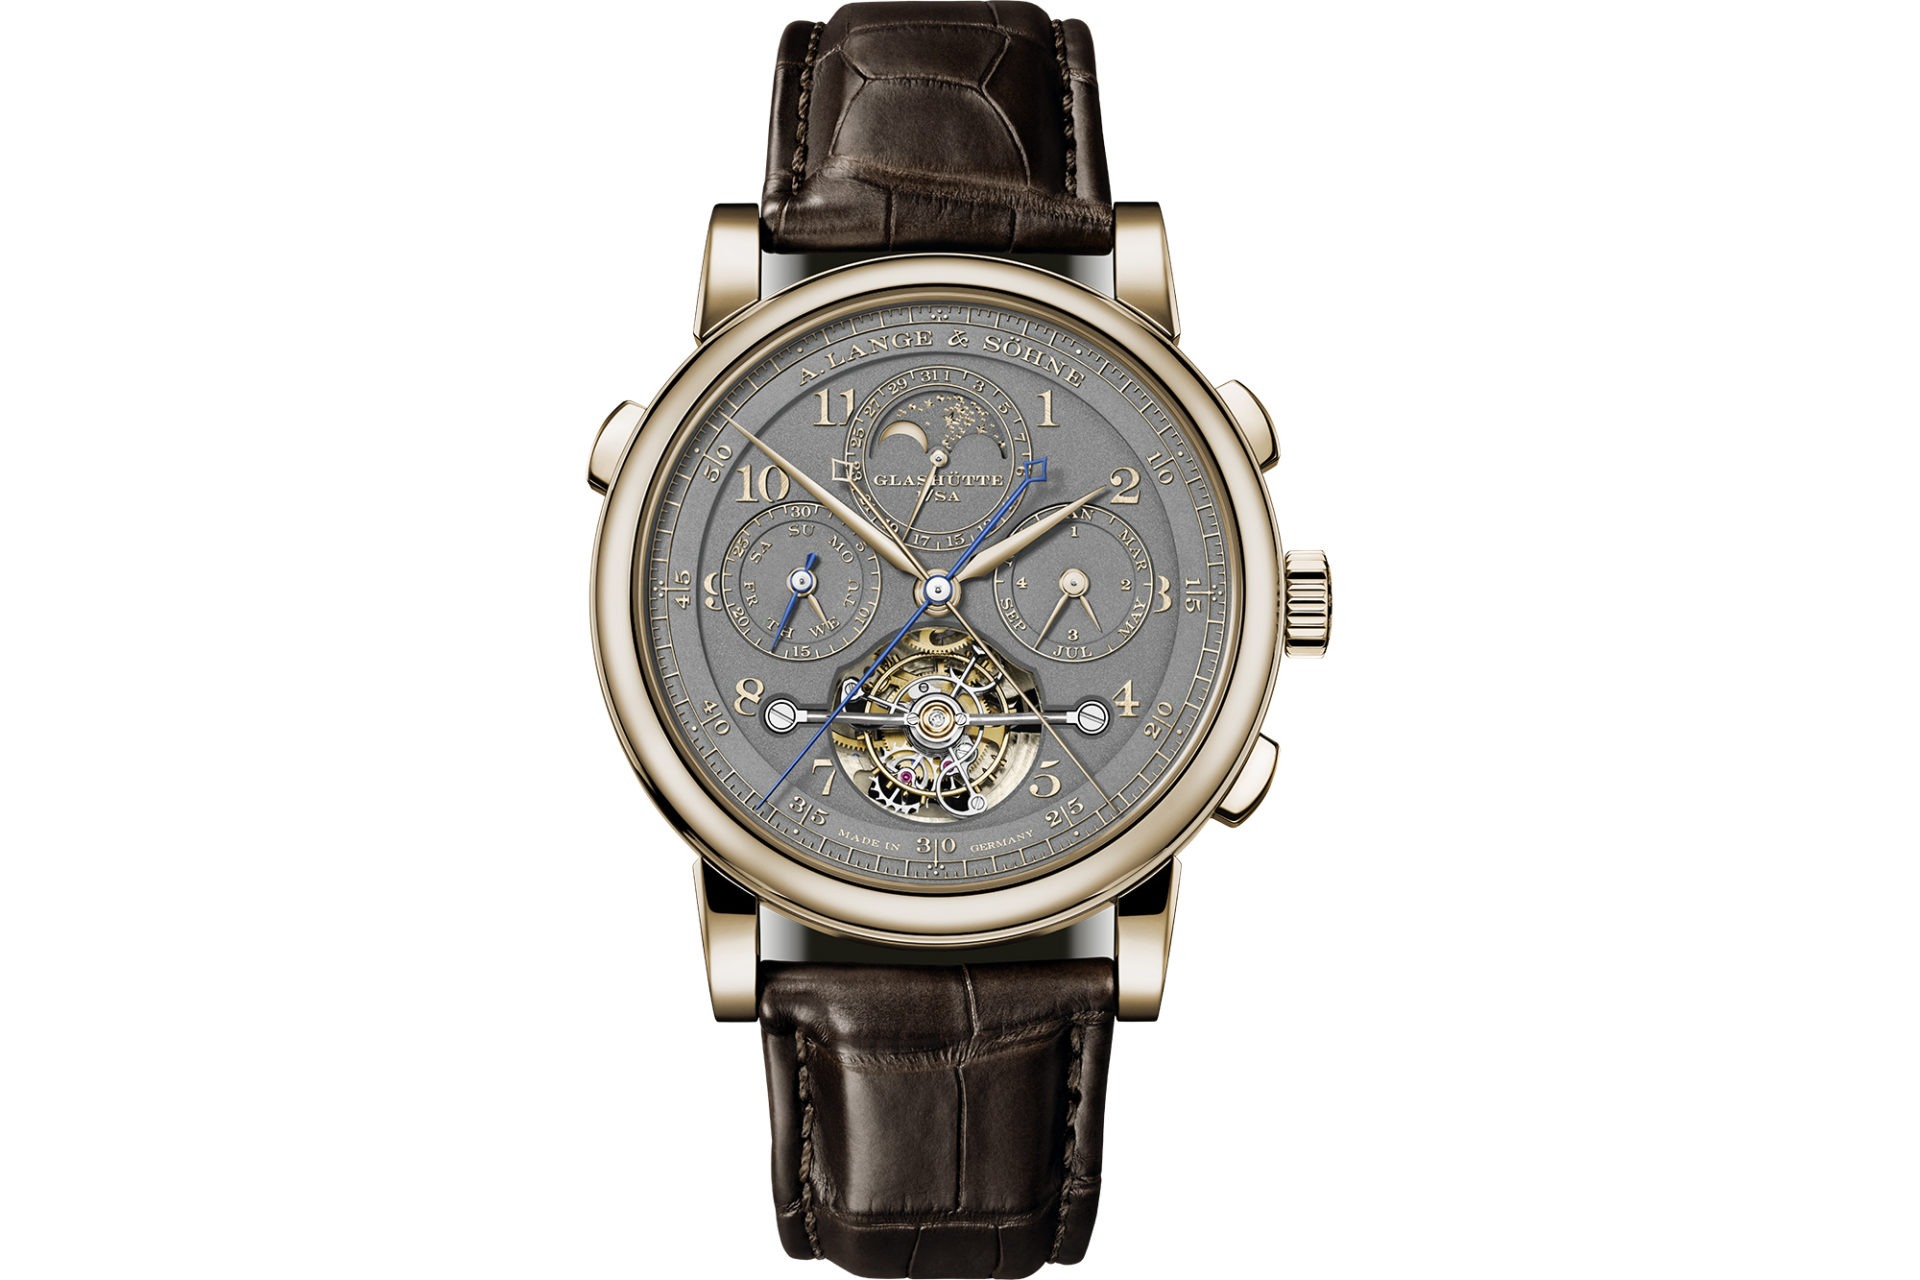 A. Lange & Söhne 1815 Tourbograph Perpetual Honeygold "Homage to F. A. Lange"